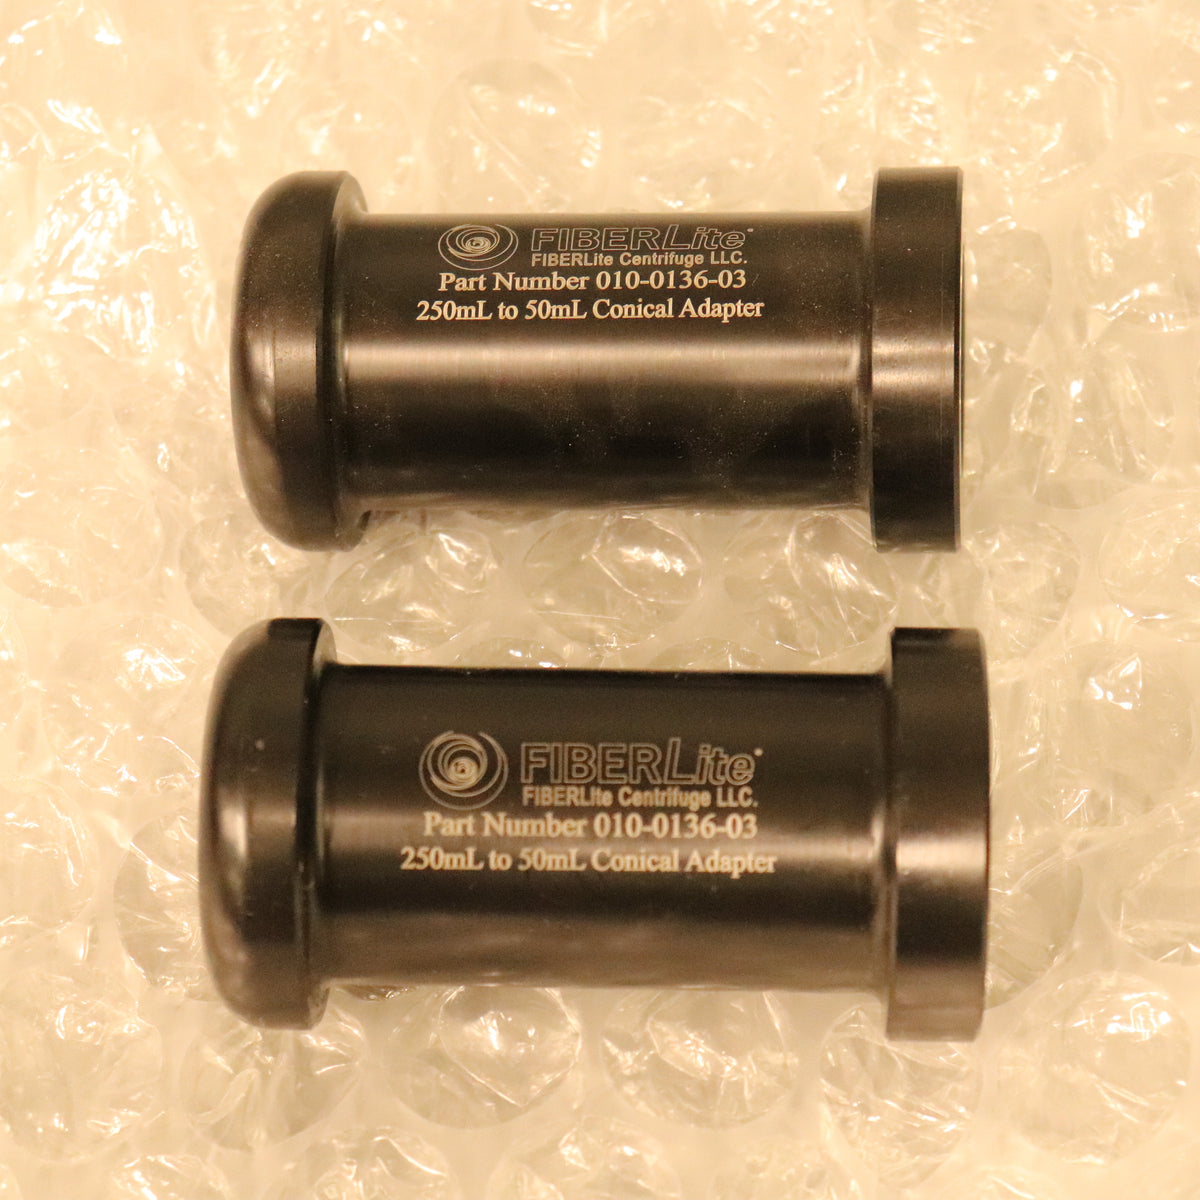 Set of (2) Thermo Fiberlite 250mL to 50mL Conical Adapters 75100136